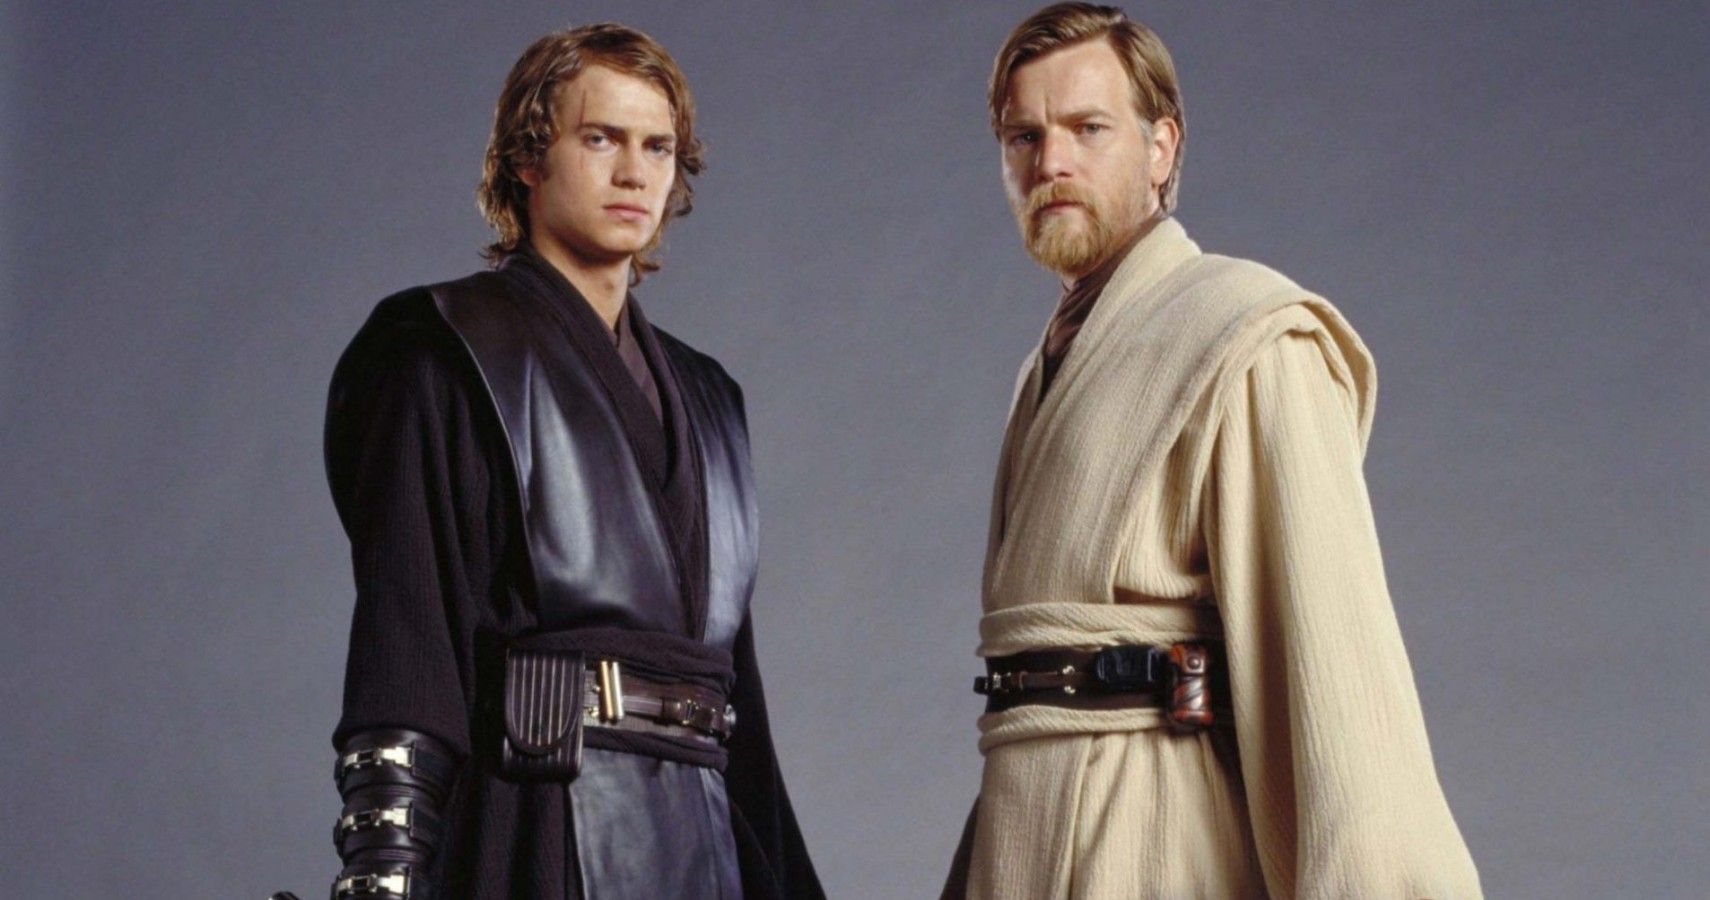  Obi  Wan  vs Anakin  Who s the ACTUAL Protagonist of the 